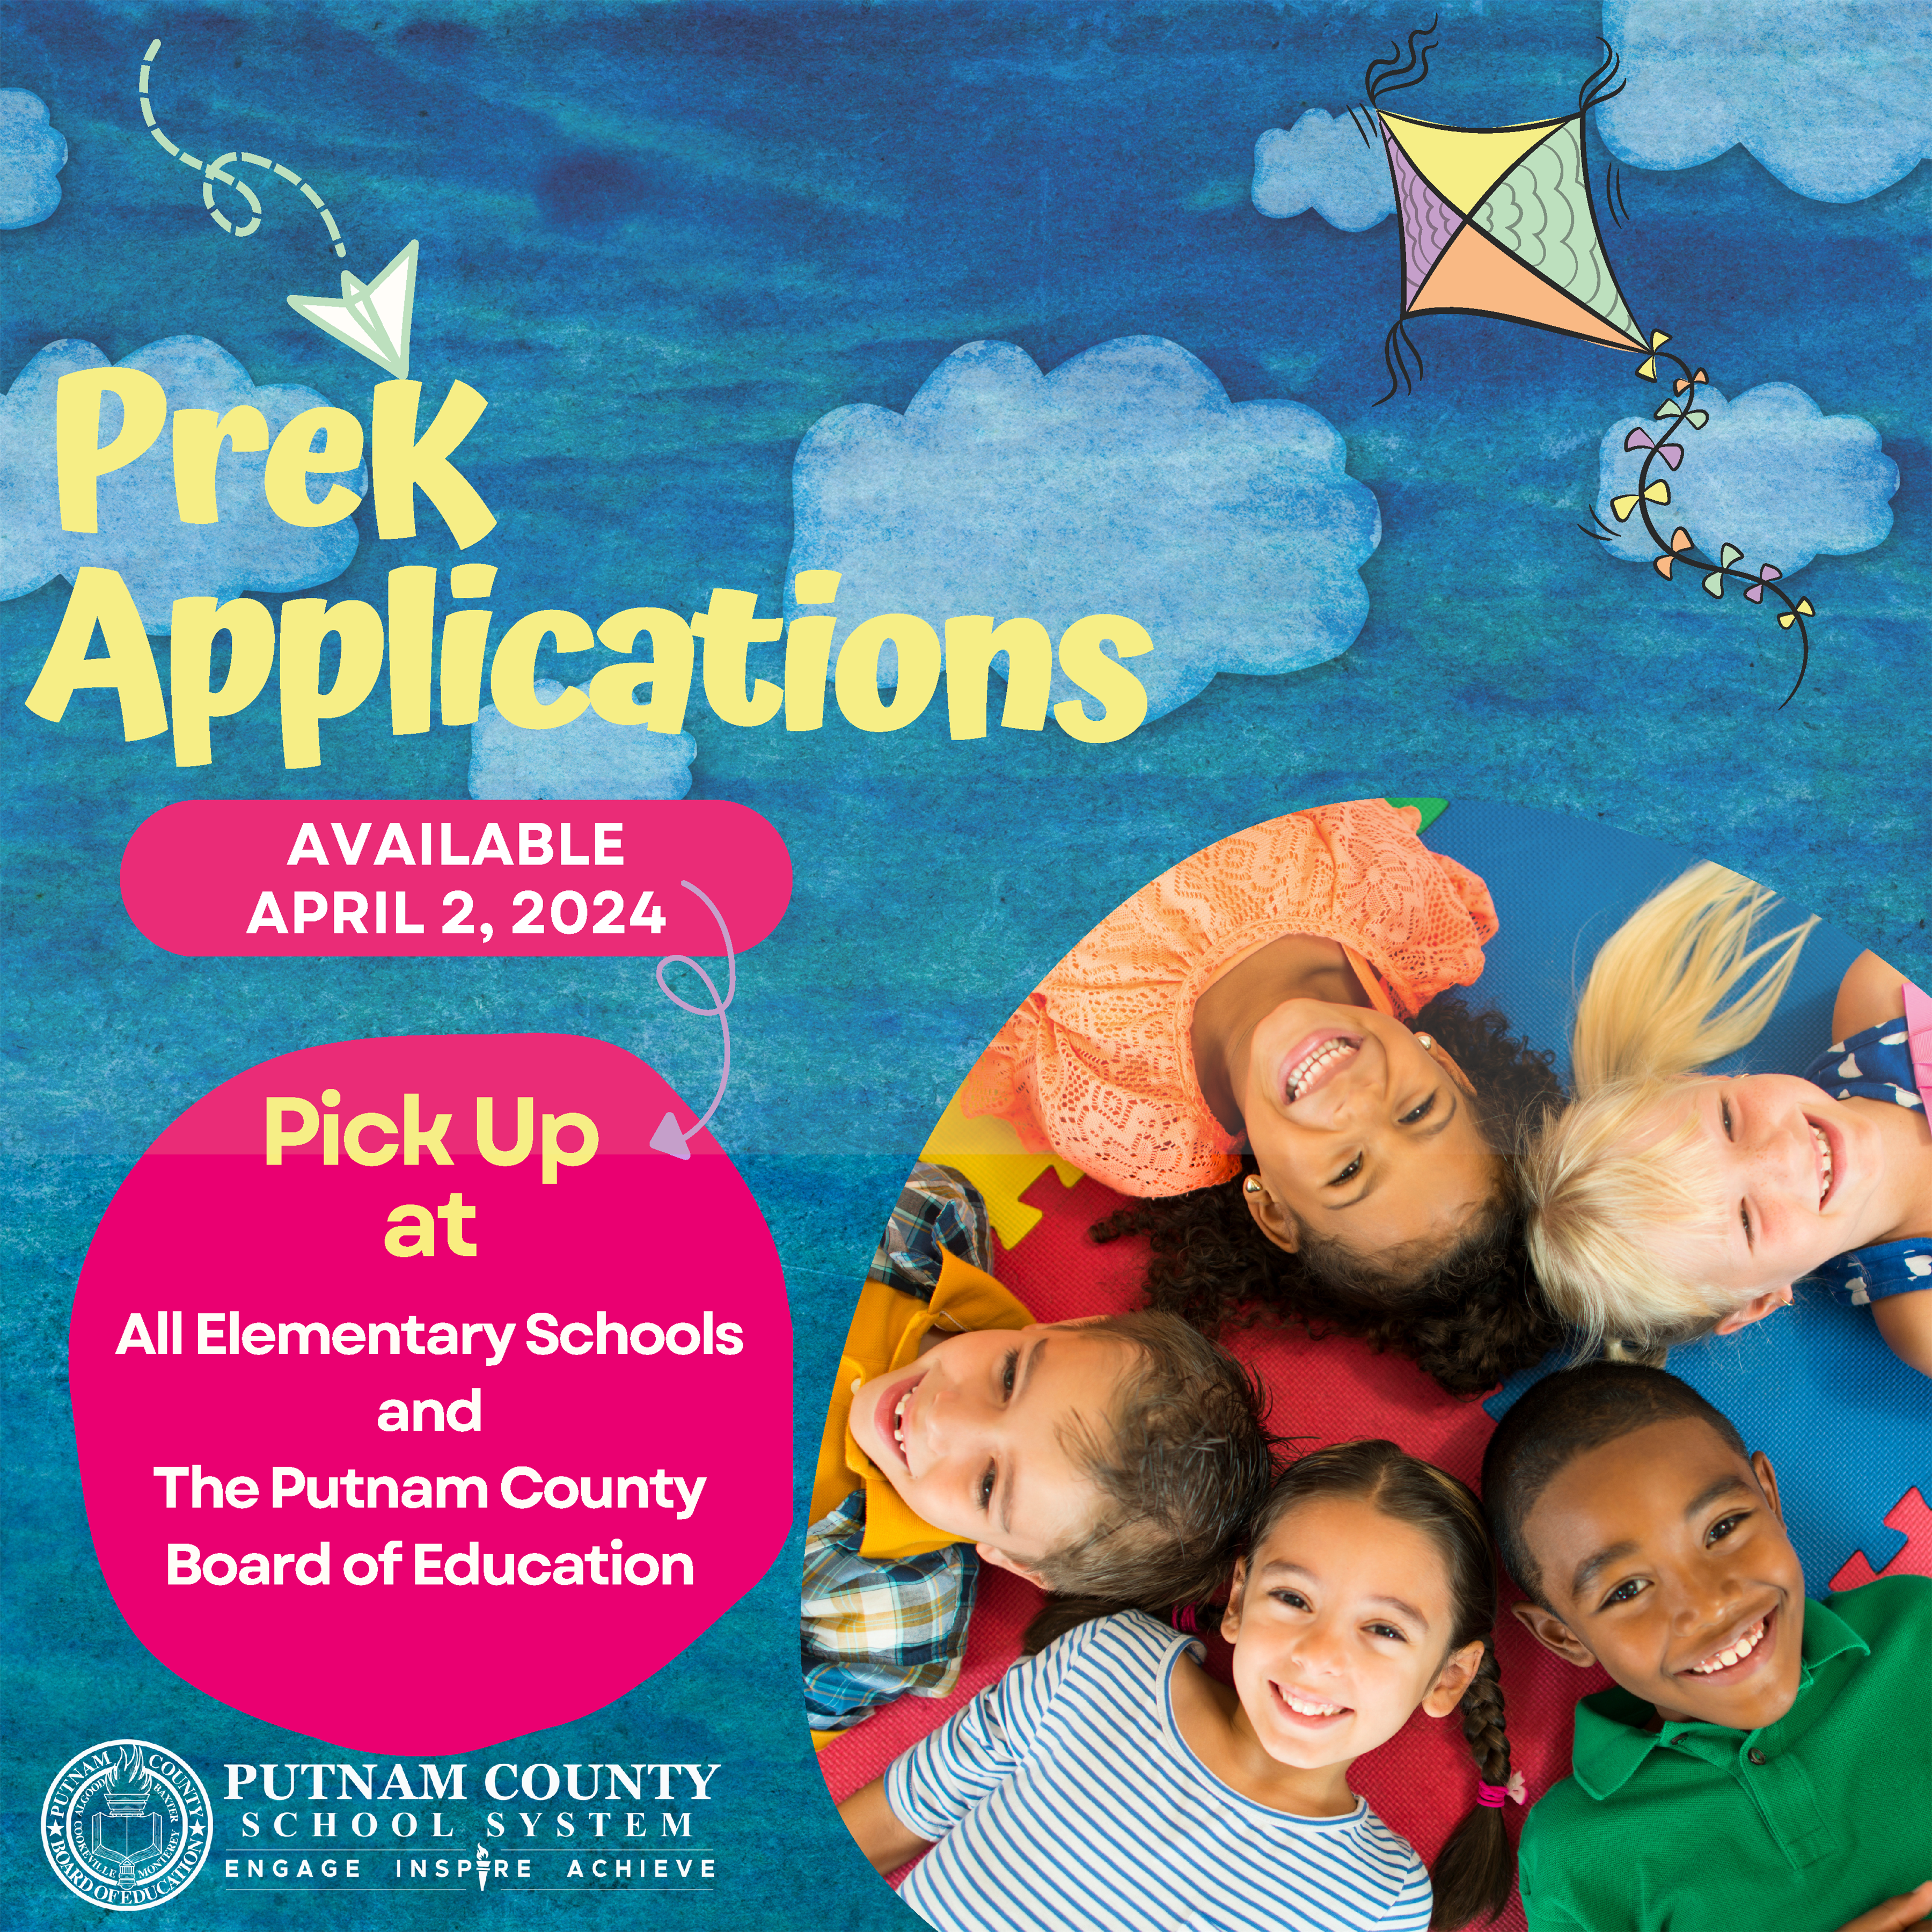 Pre-K Applications available April 2, 2024. Pick up at all Elementary Schools and the Putnam County Board of Education. Putnam County School System. The schools of Algood, Baxter, Cookeville, and Monterey. Engage. Inspire. Achieve.